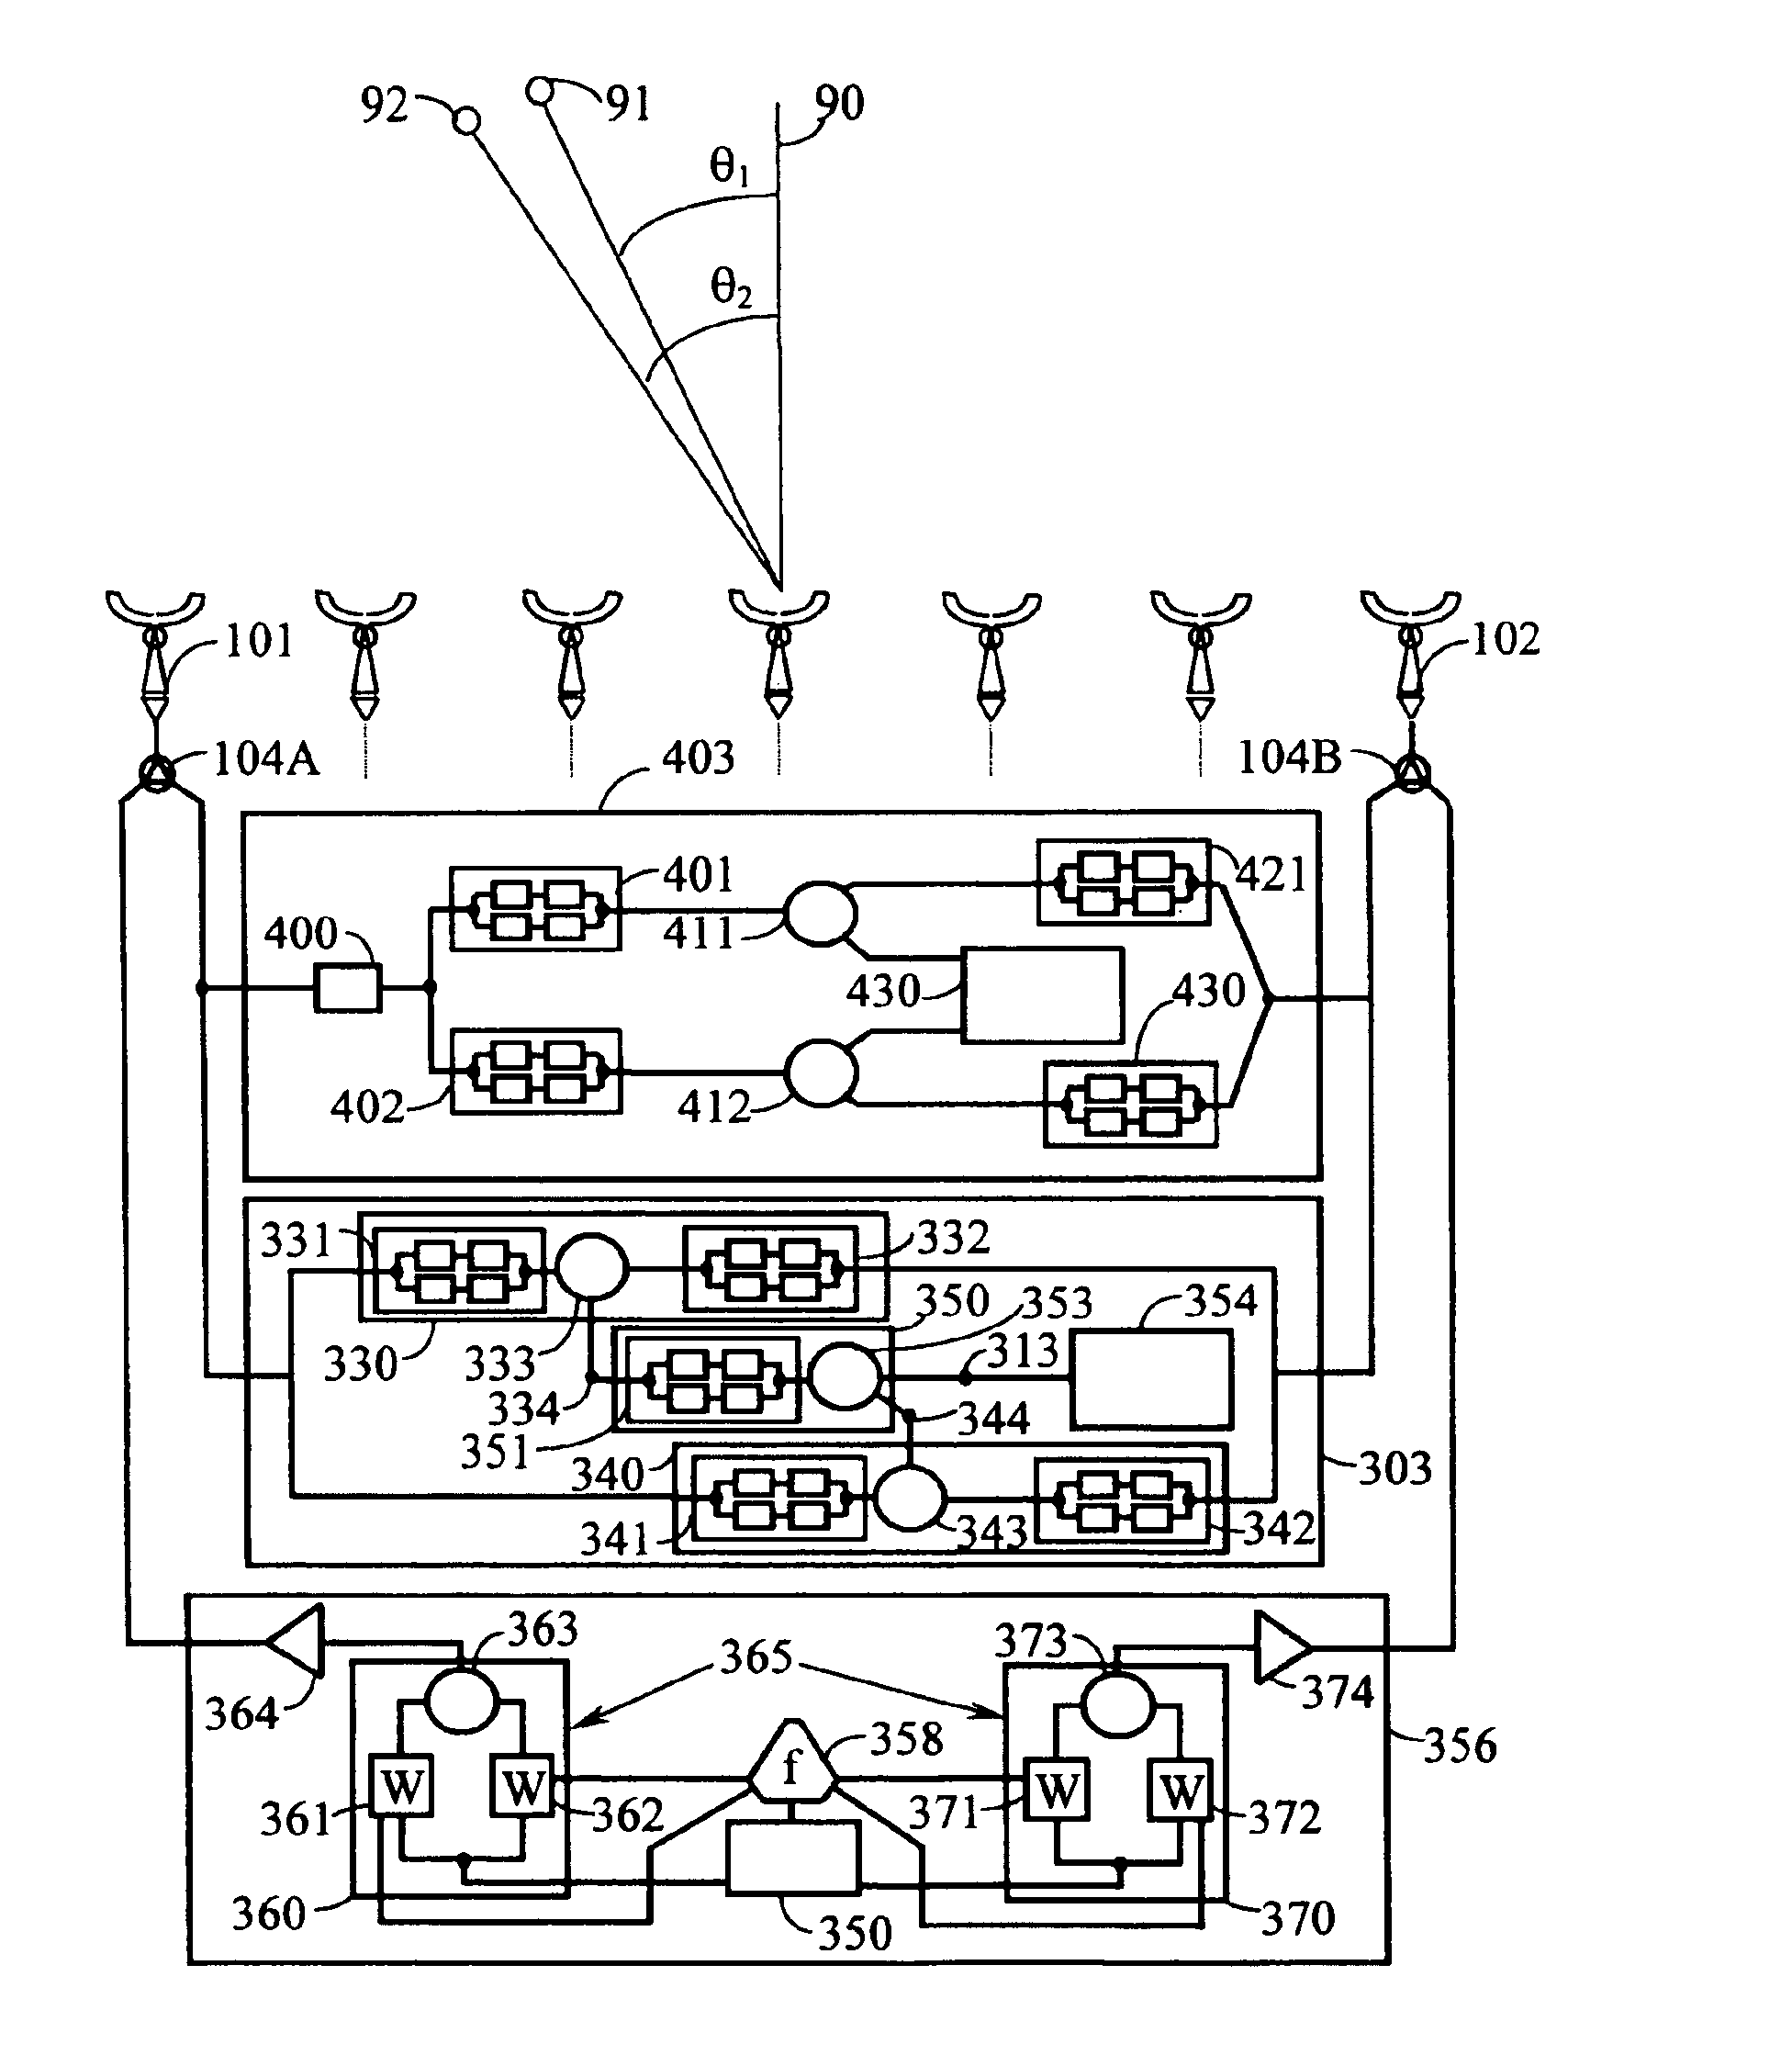 Cancellation system for frequency reuse in microwave communications